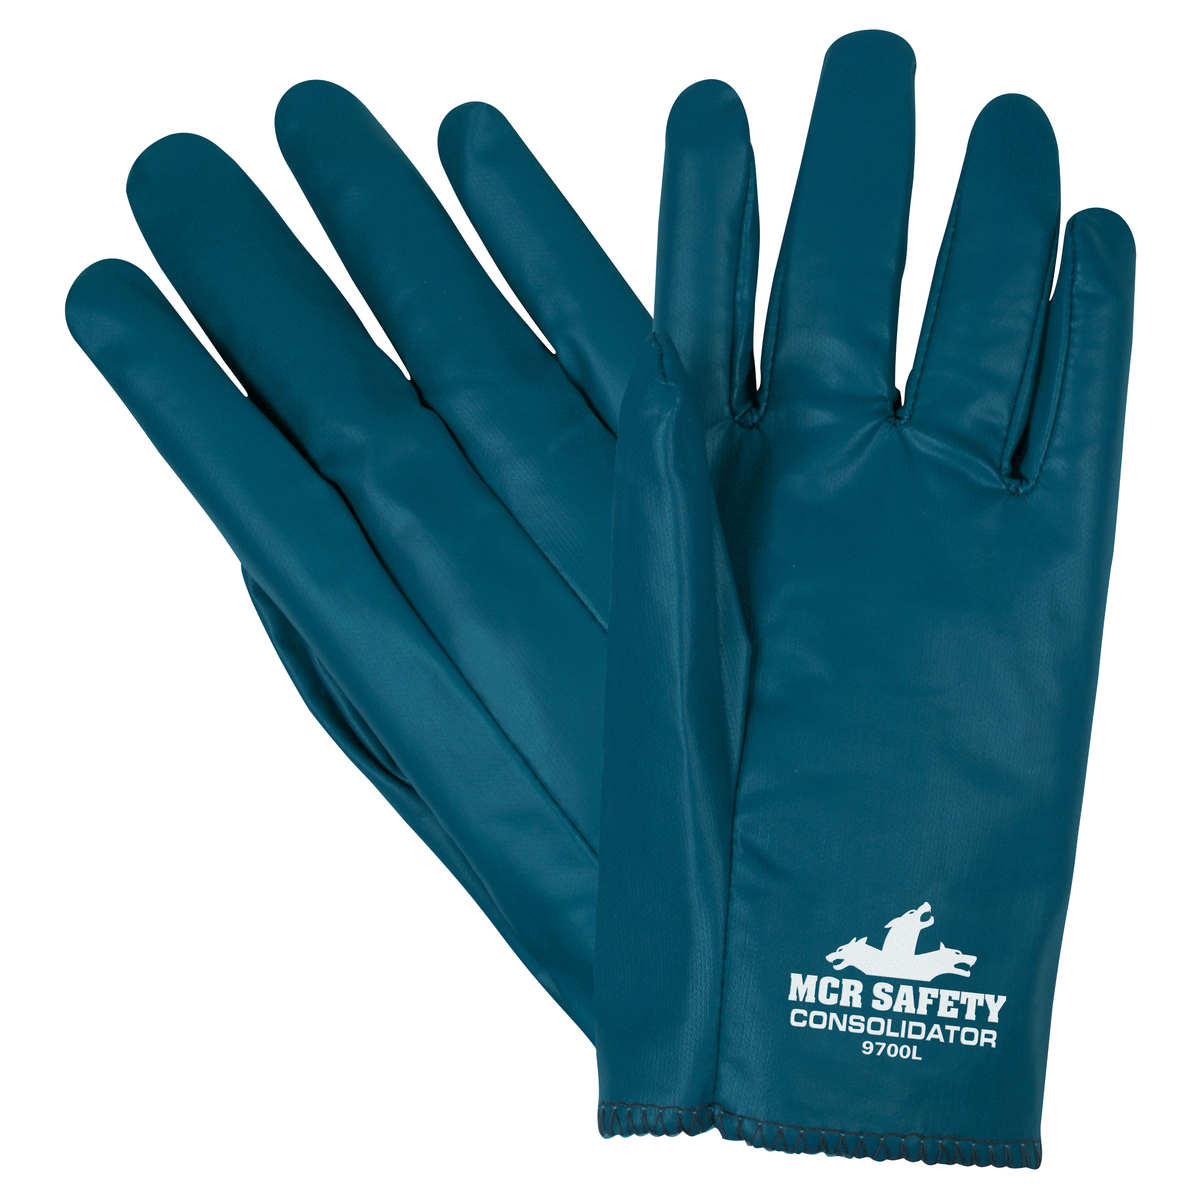 MCR Safety® Medium Consolidator® Blue Premium Nitrile Work Gloves With White Nitrile Liner And Slip-On Cuff